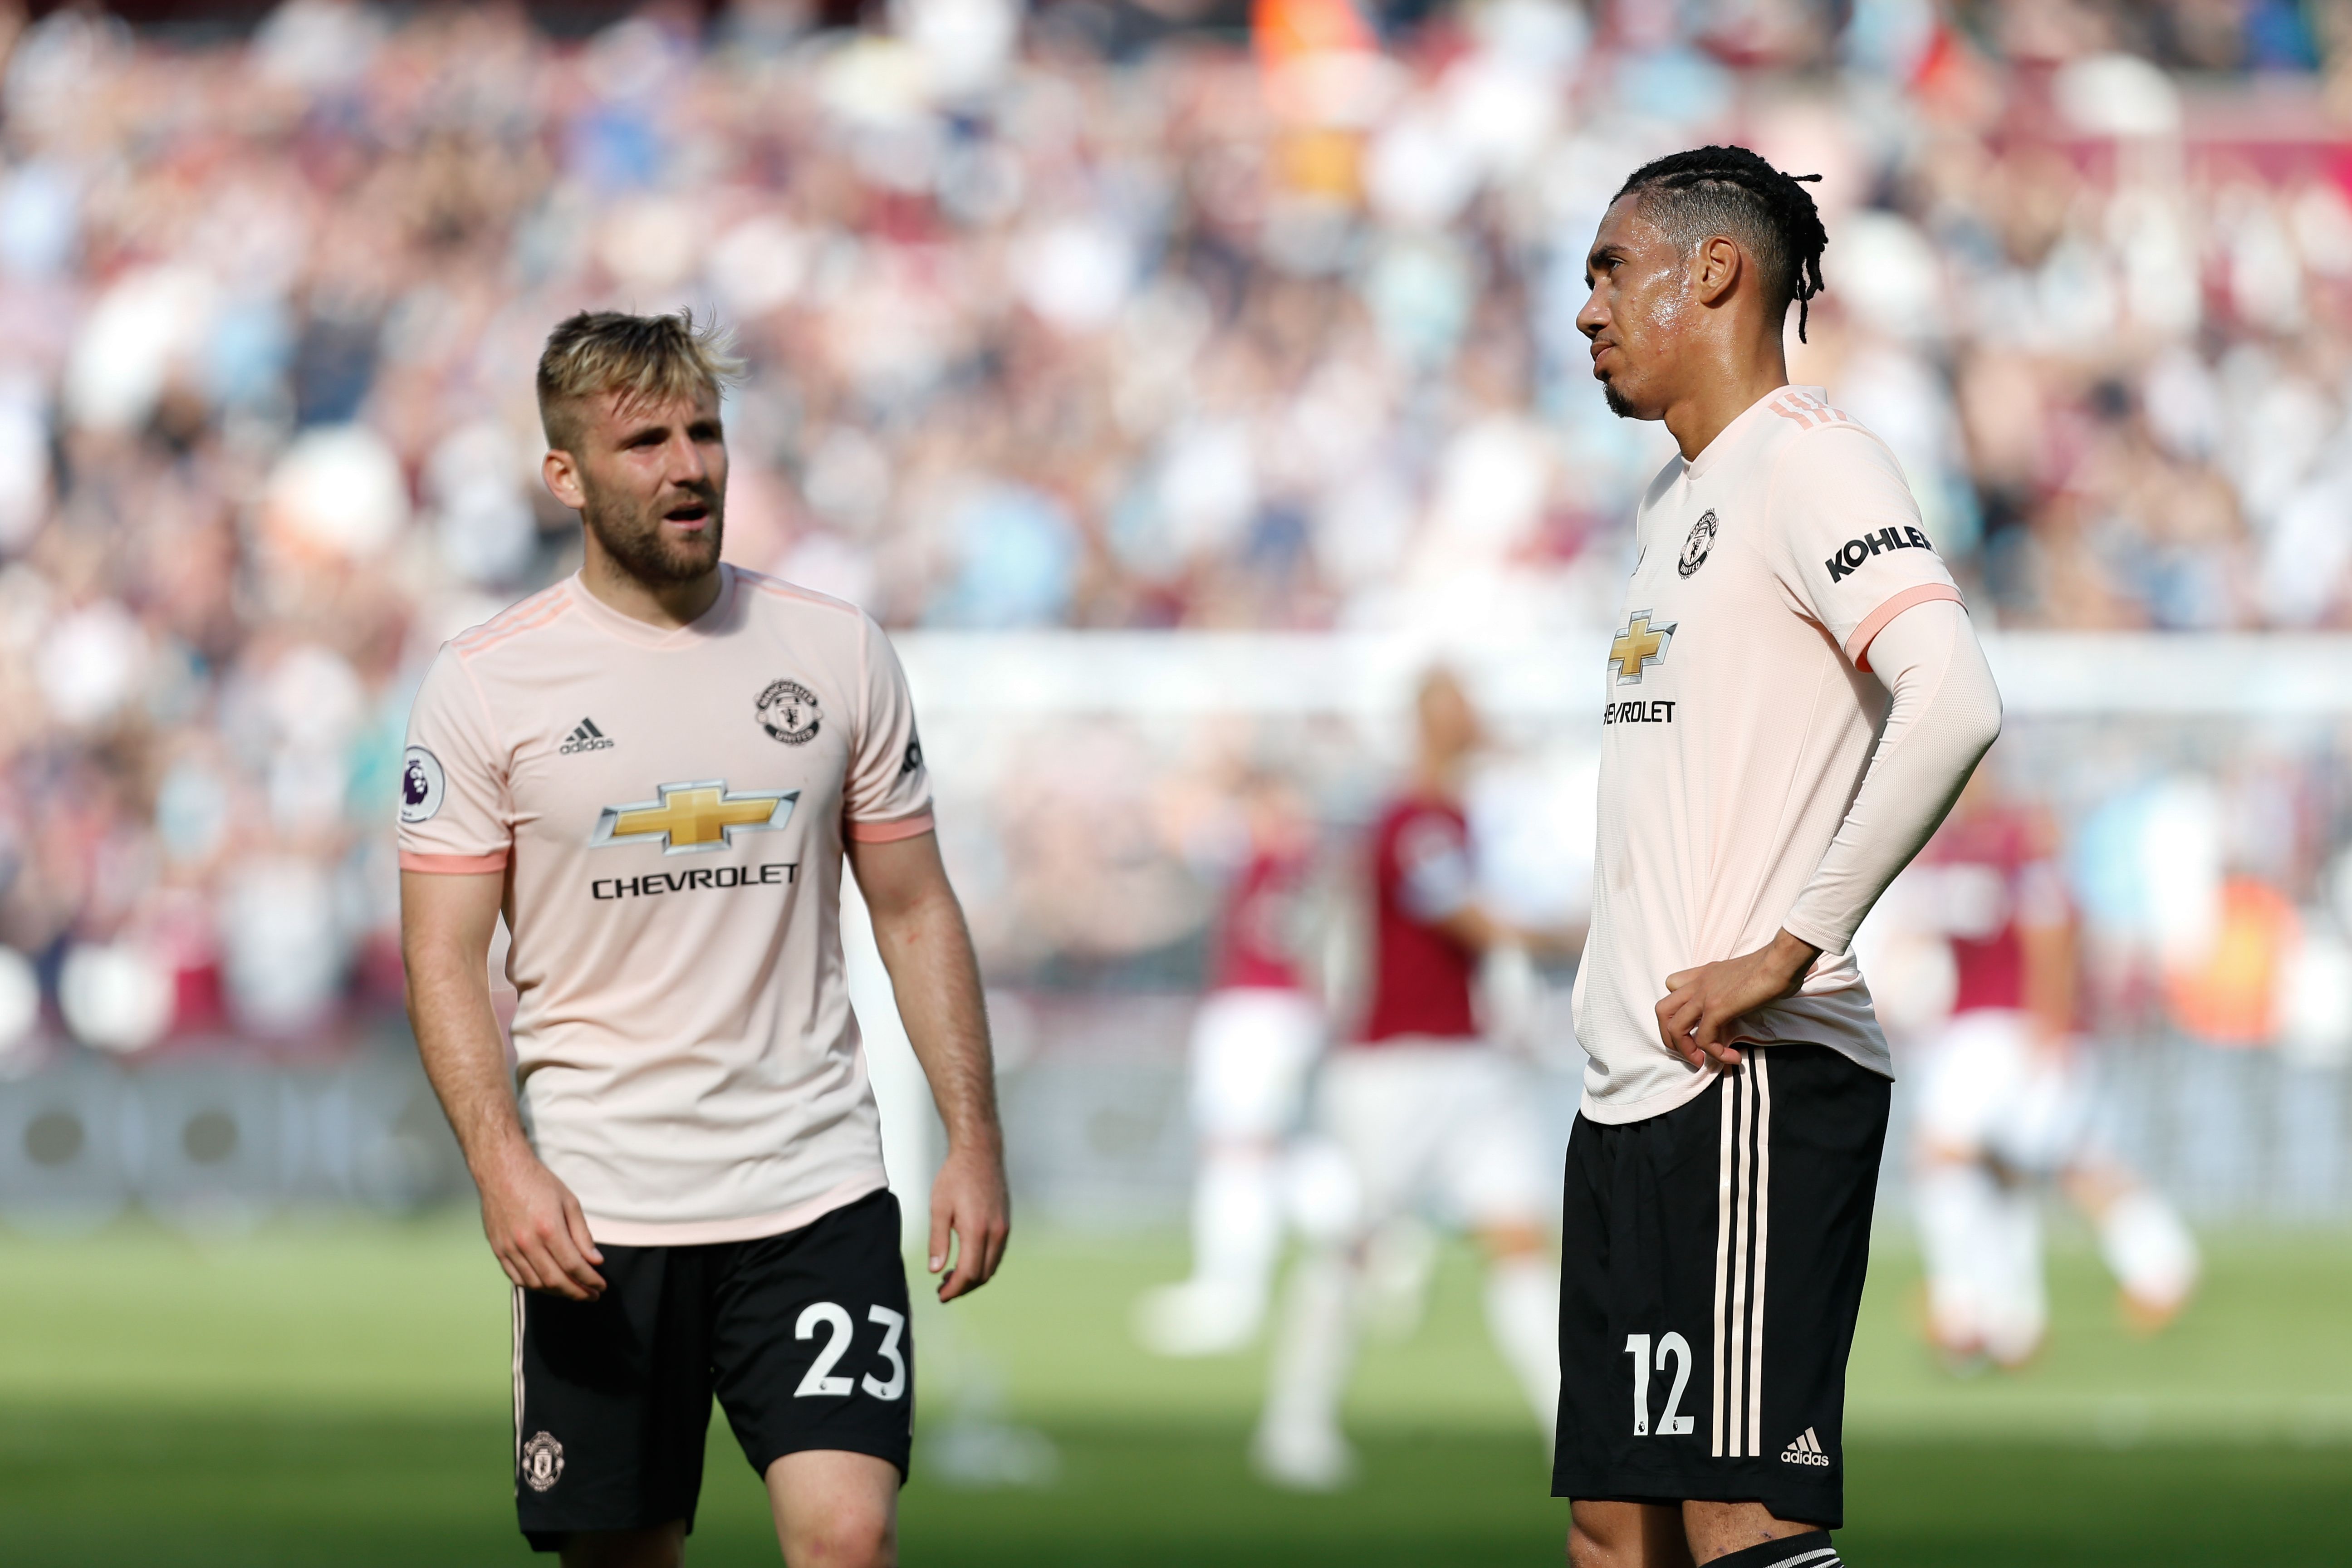 Manchester United's English defender Luke Shaw (L) and Manchester United's English defender Chris Smalling (R) react at the final whistle of the English Premier League football match between West Ham United and Manchester United at The London Stadium, in east London on September 29, 2018. (Photo by Ian KINGTON / AFP) / RESTRICTED TO EDITORIAL USE. No use with unauthorized audio, video, data, fixture lists, club/league logos or 'live' services. Online in-match use limited to 120 images. An additional 40 images may be used in extra time. No video emulation. Social media in-match use limited to 120 images. An additional 40 images may be used in extra time. No use in betting publications, games or single club/league/player publications. /         (Photo credit should read IAN KINGTON/AFP/Getty Images)